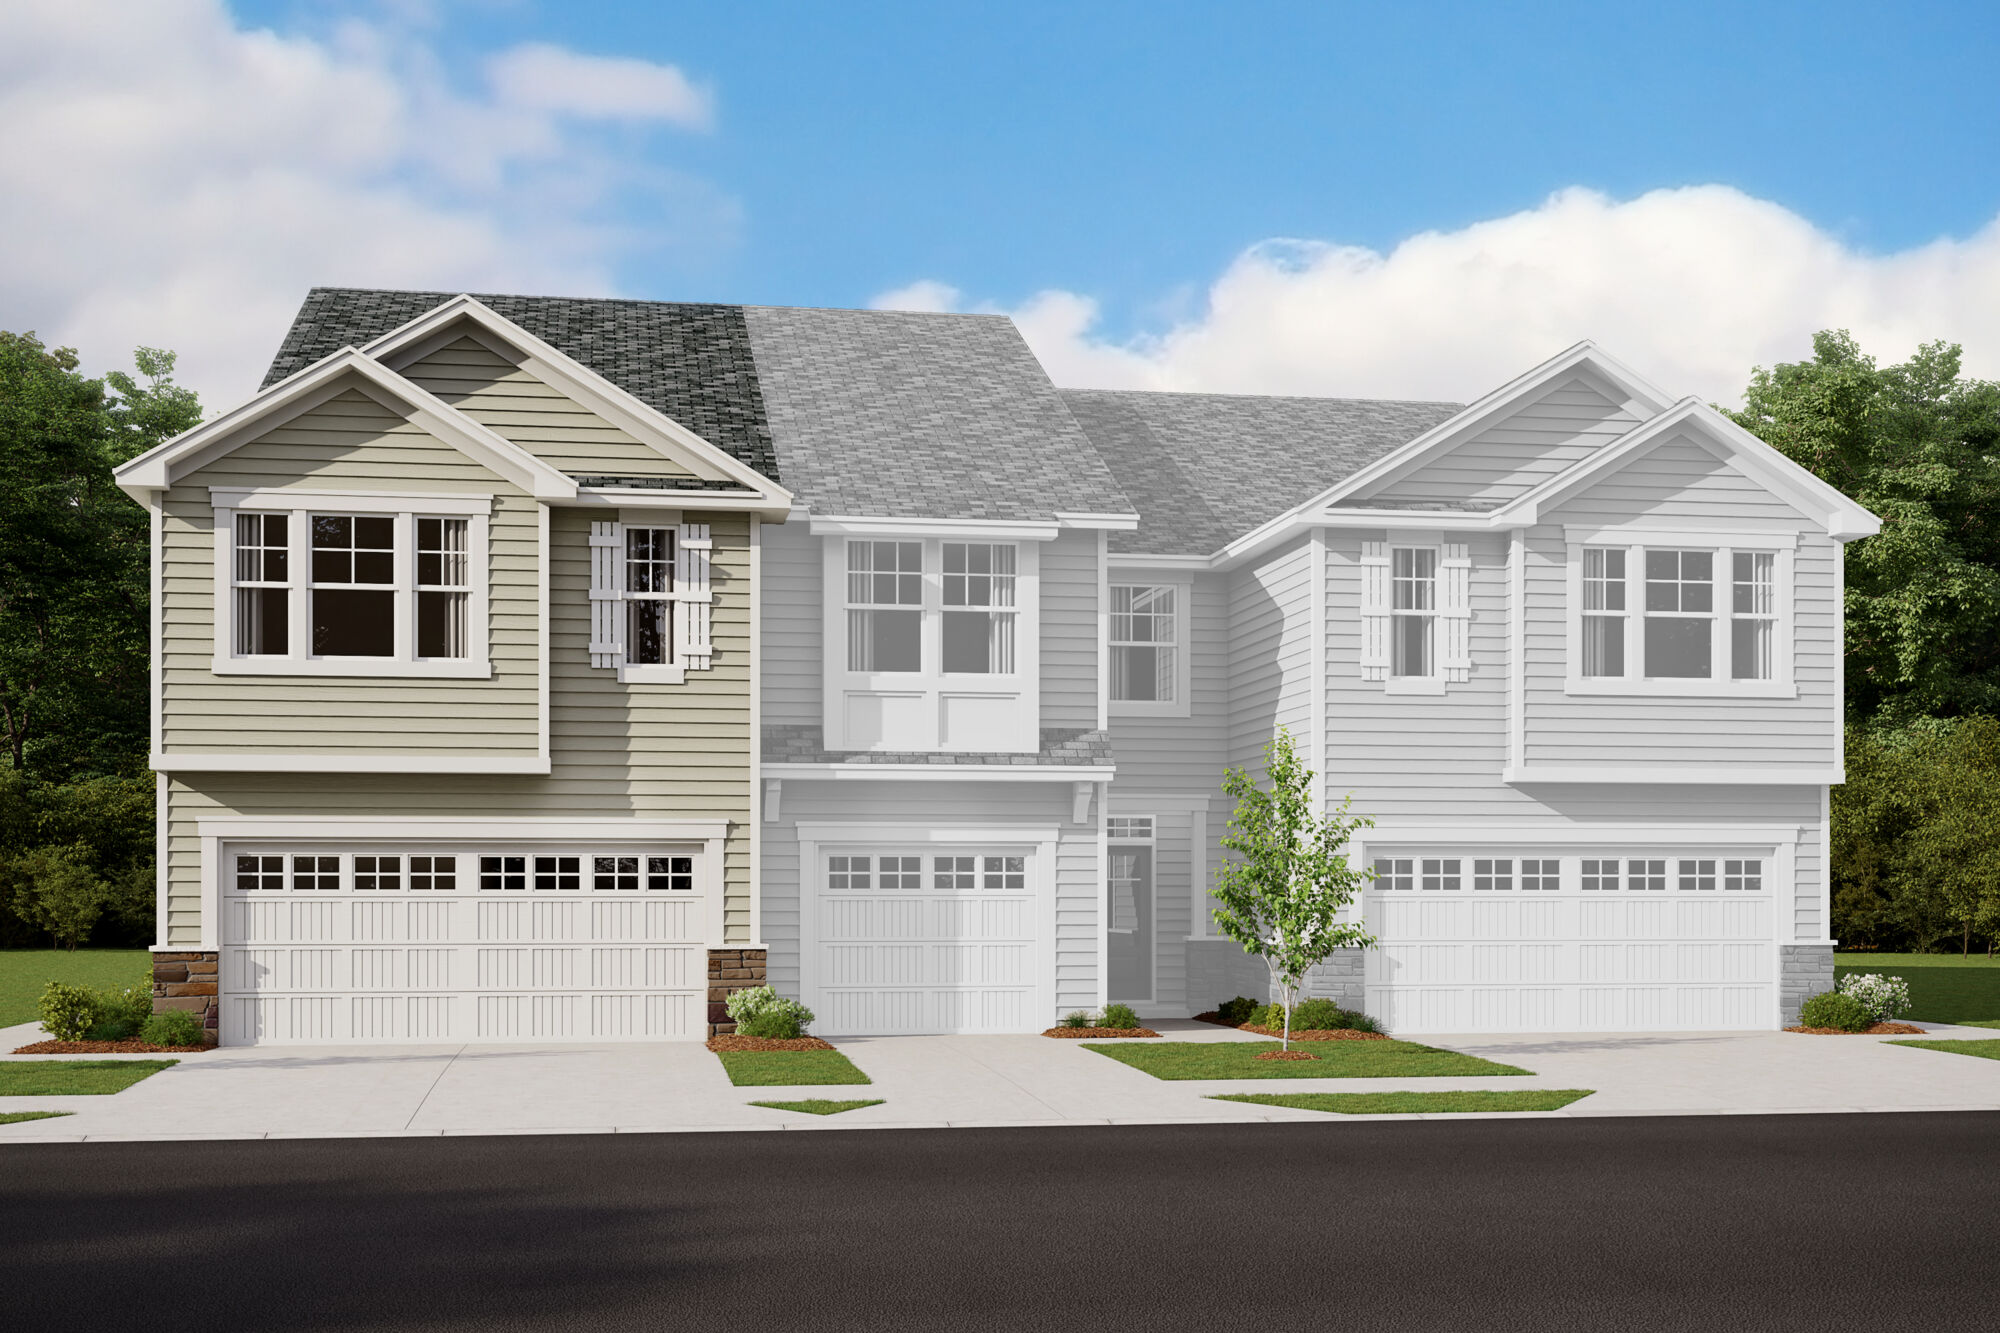  Town Homes with window and garage